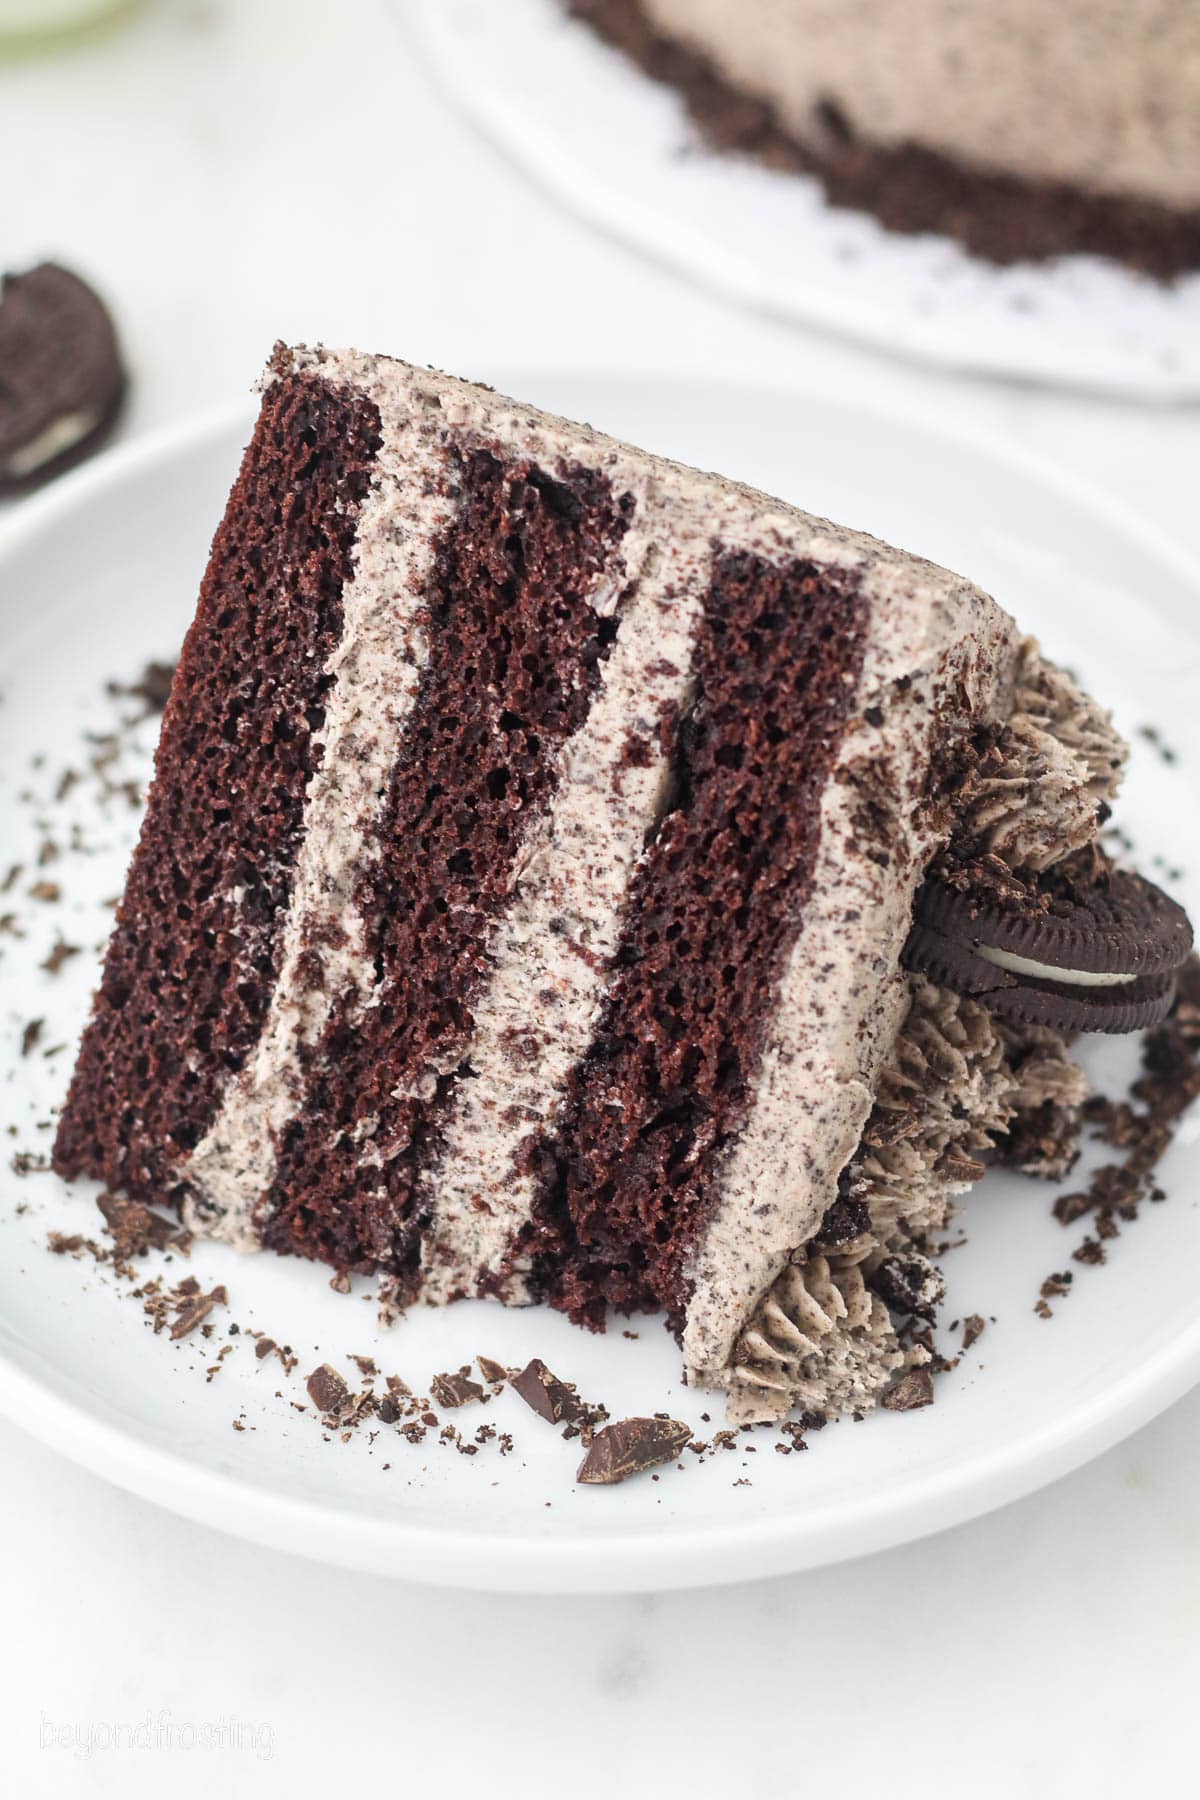 A slice of Oreo chocolate cake garnished with Oreos on a white pate.